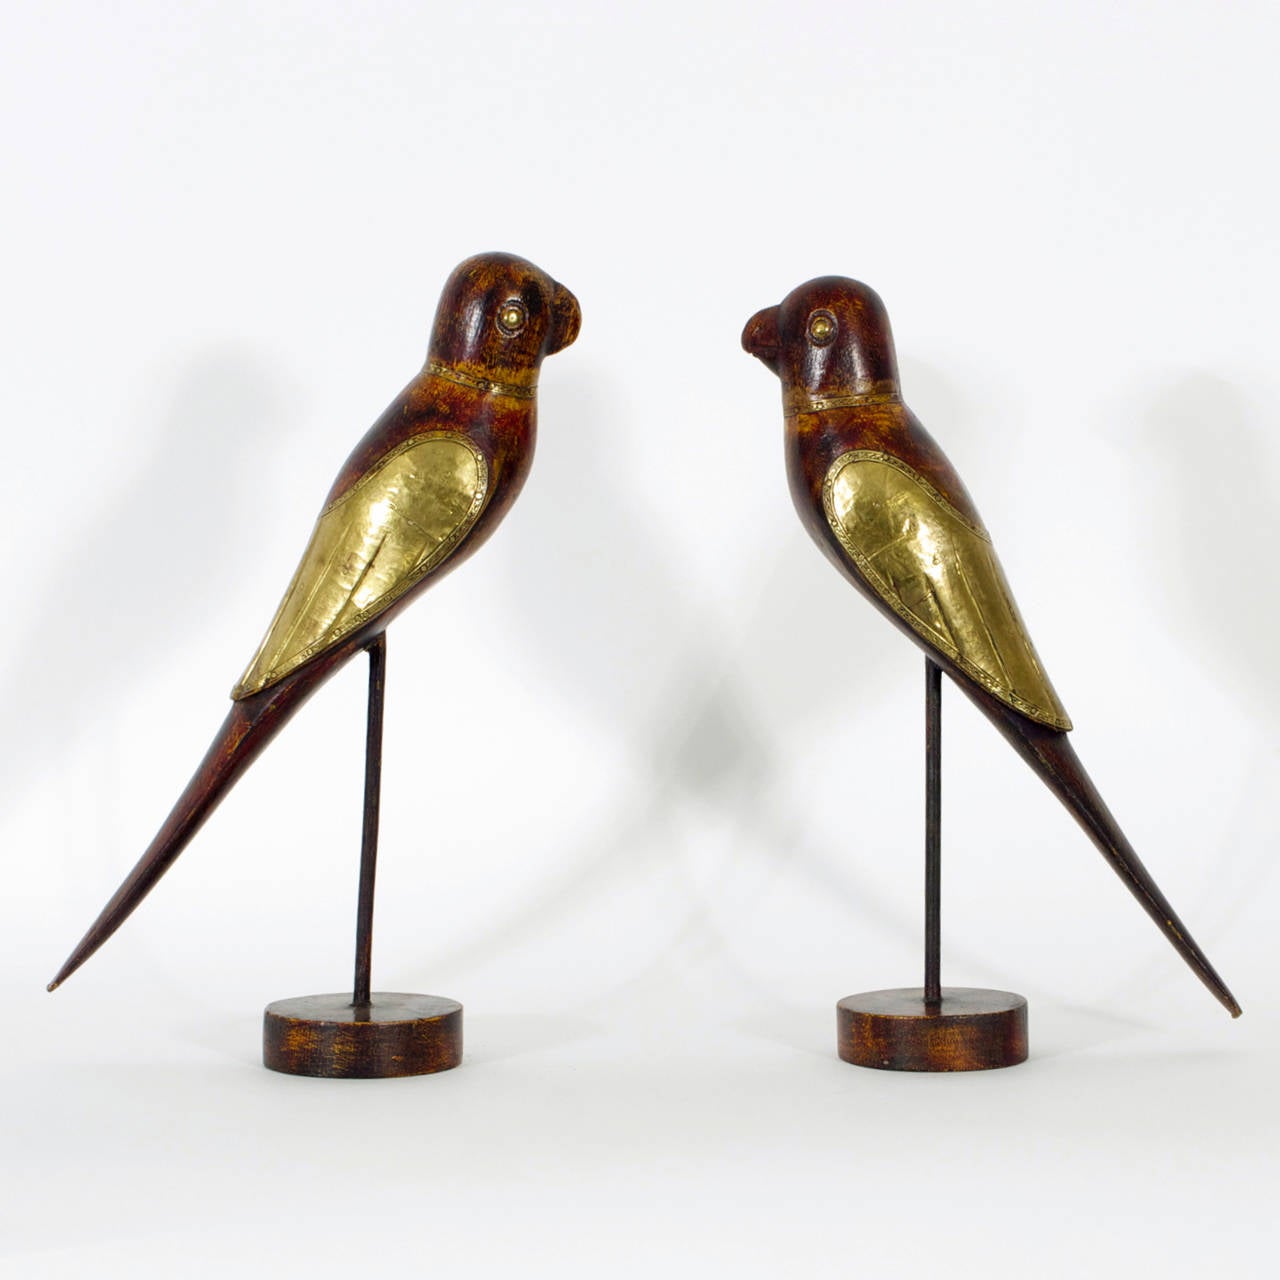 Amusing pair of carved wood birds or parrots each having hammered and decorated brass wings, collars and eyes, all in warm worn paint. Mounted on metal stems supported on round wood bases. Rustic and soulful. Due to the hand carved nature, the birds